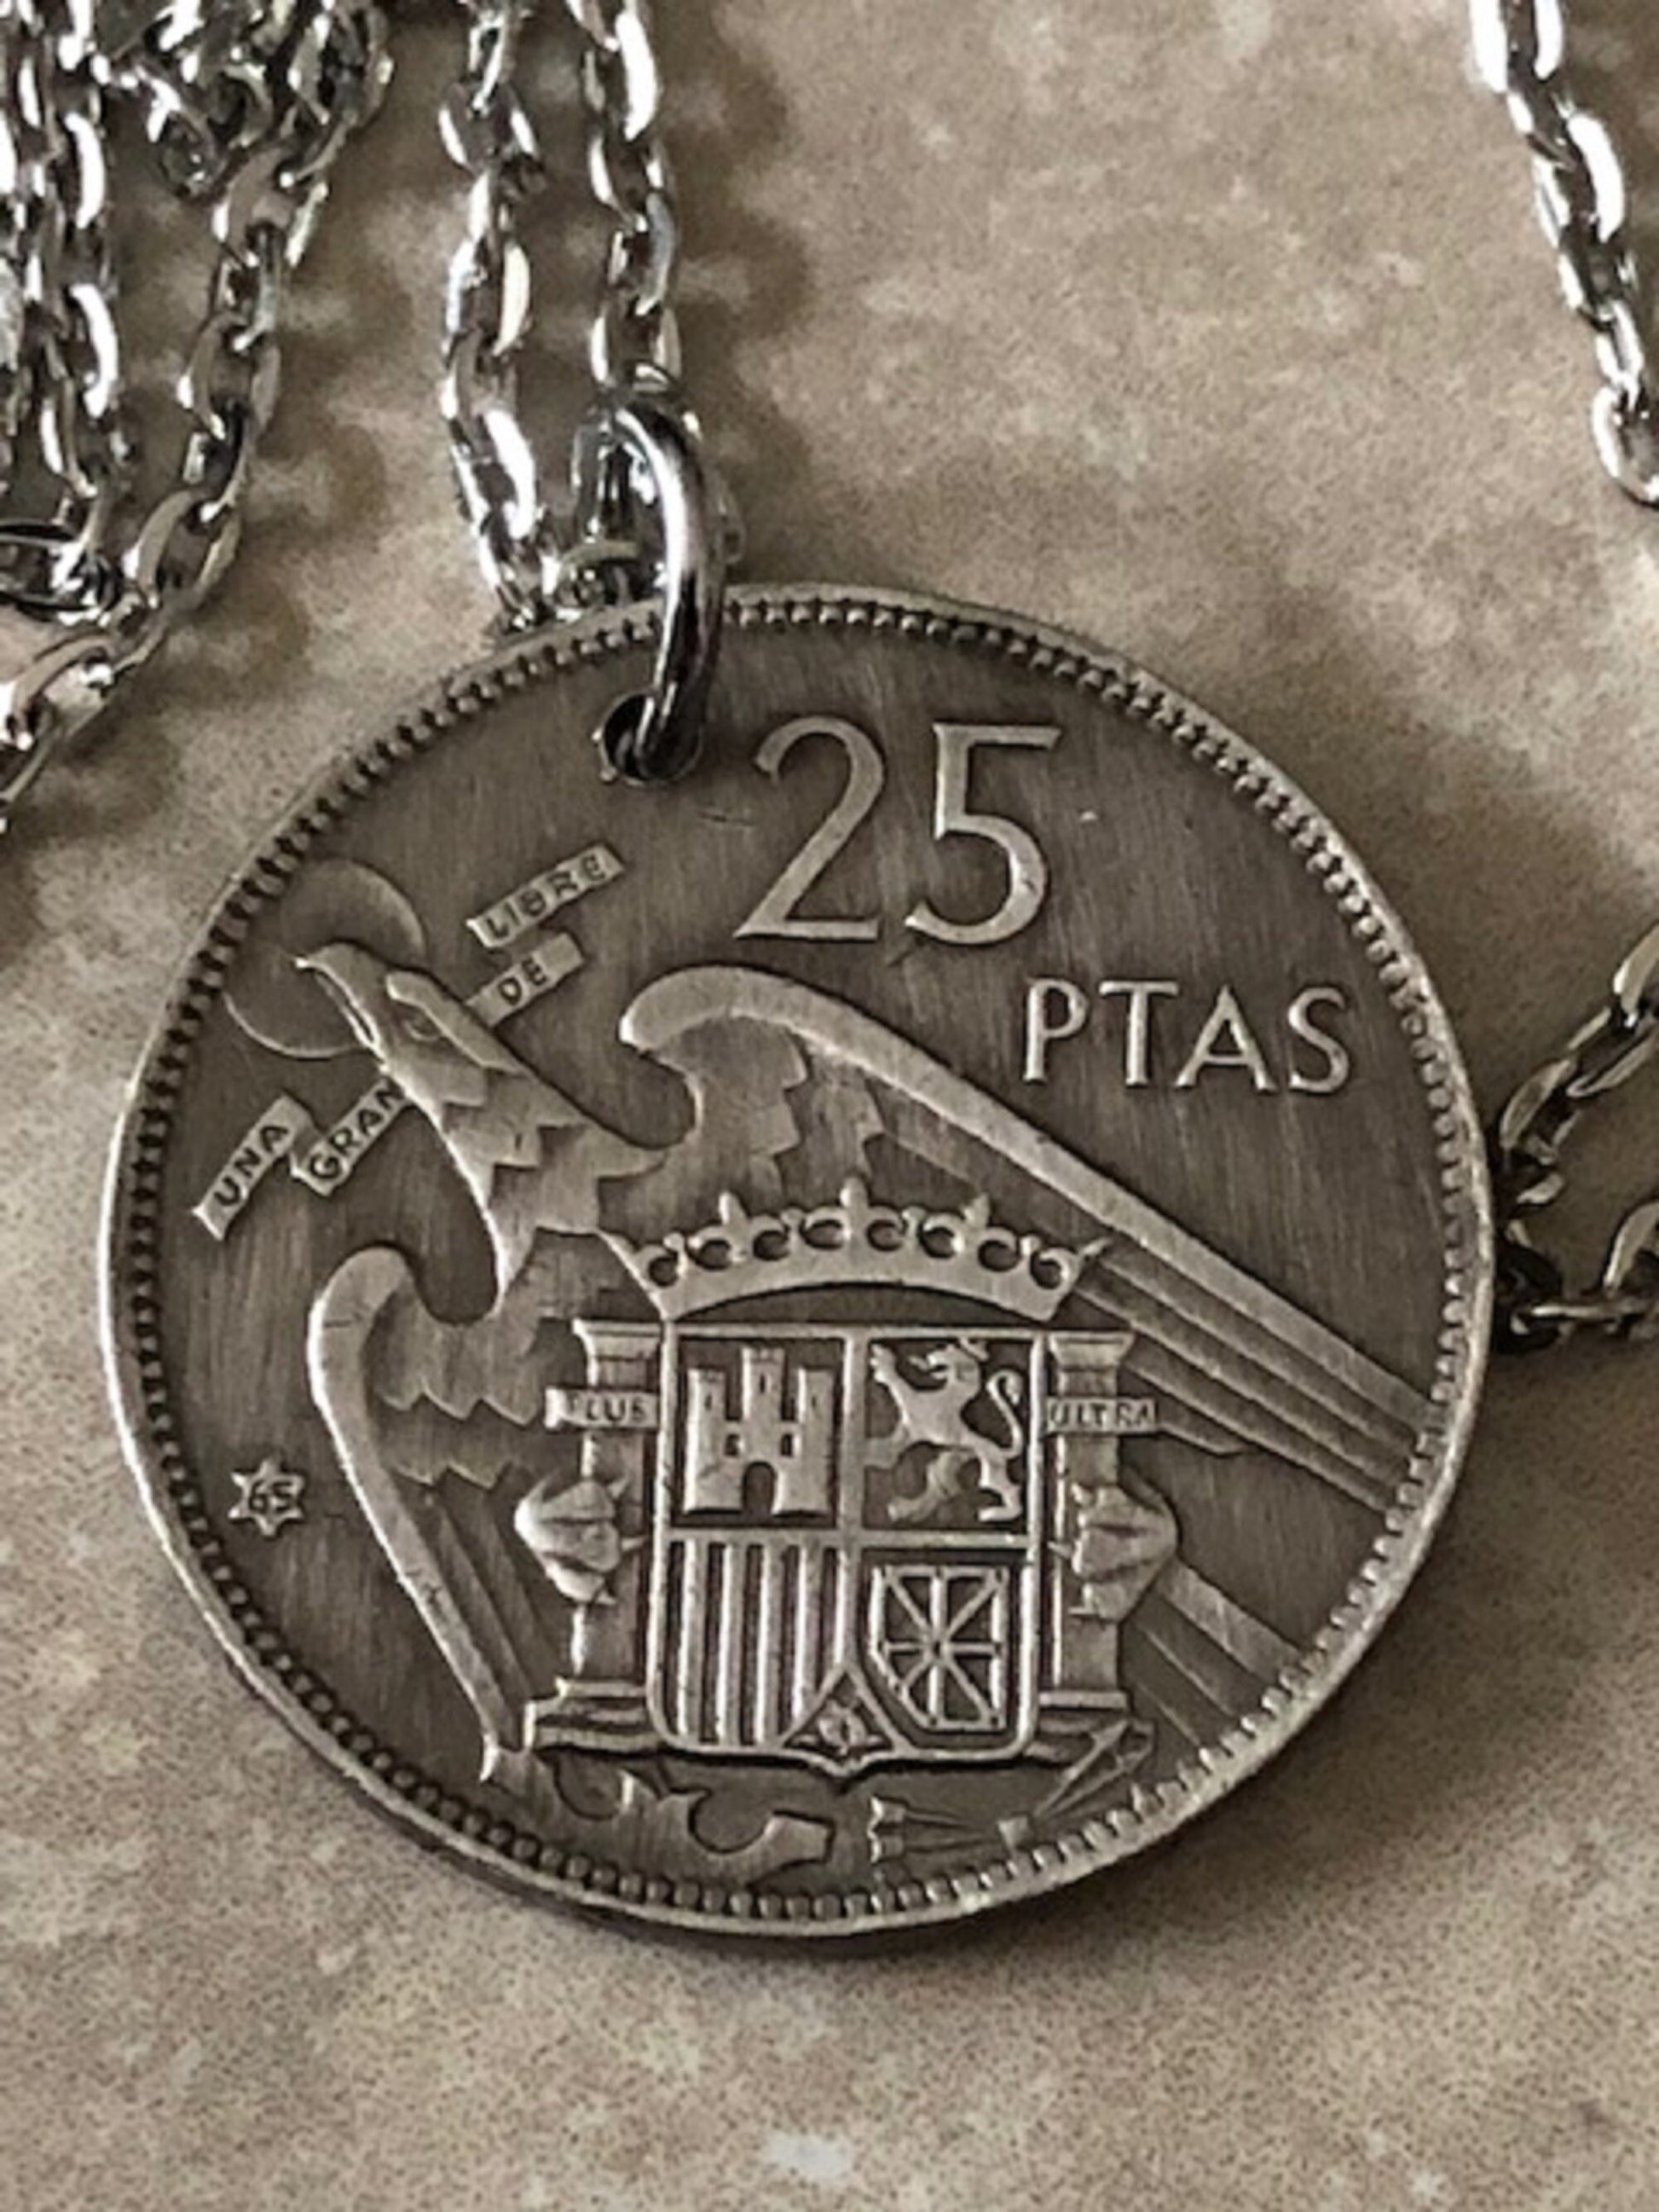 Spain Coin Pendant Spanish 25 Ptas 1957 Necklace Handmade Jewelry Gift For Friend Coin Charm Gift For Him, Her, World Coins Collector